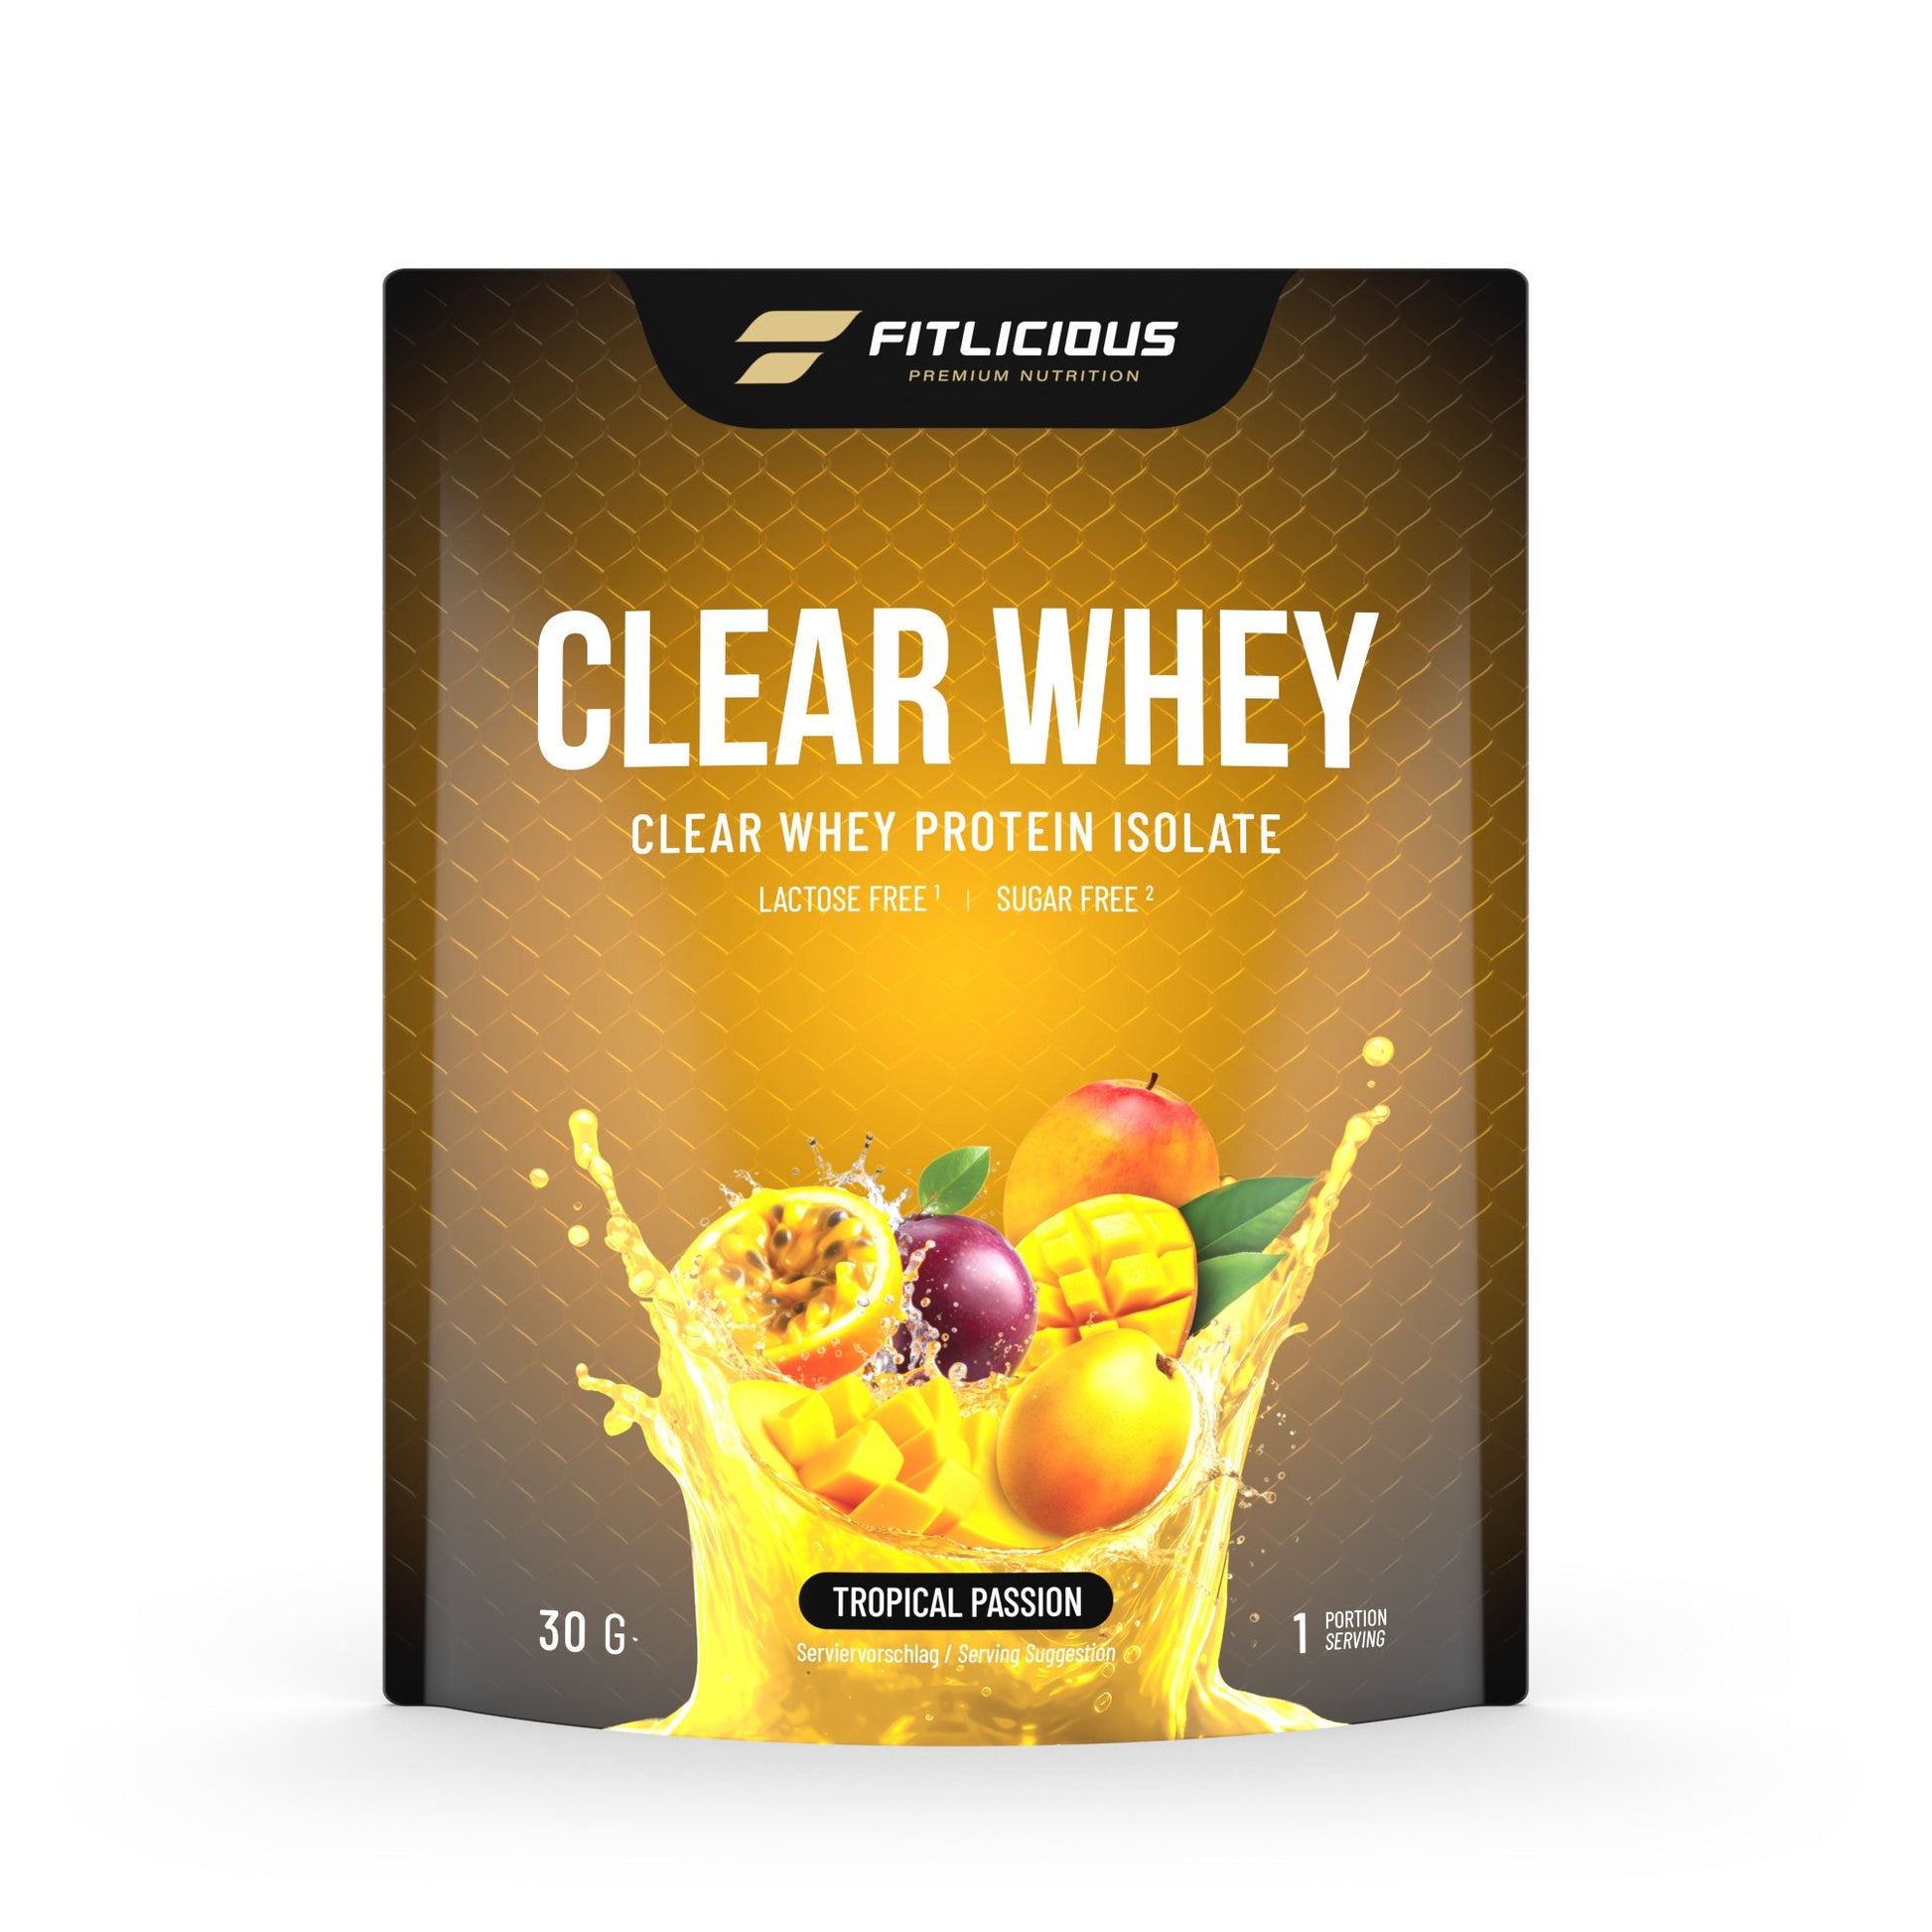 Clear Whey Tropical Passion